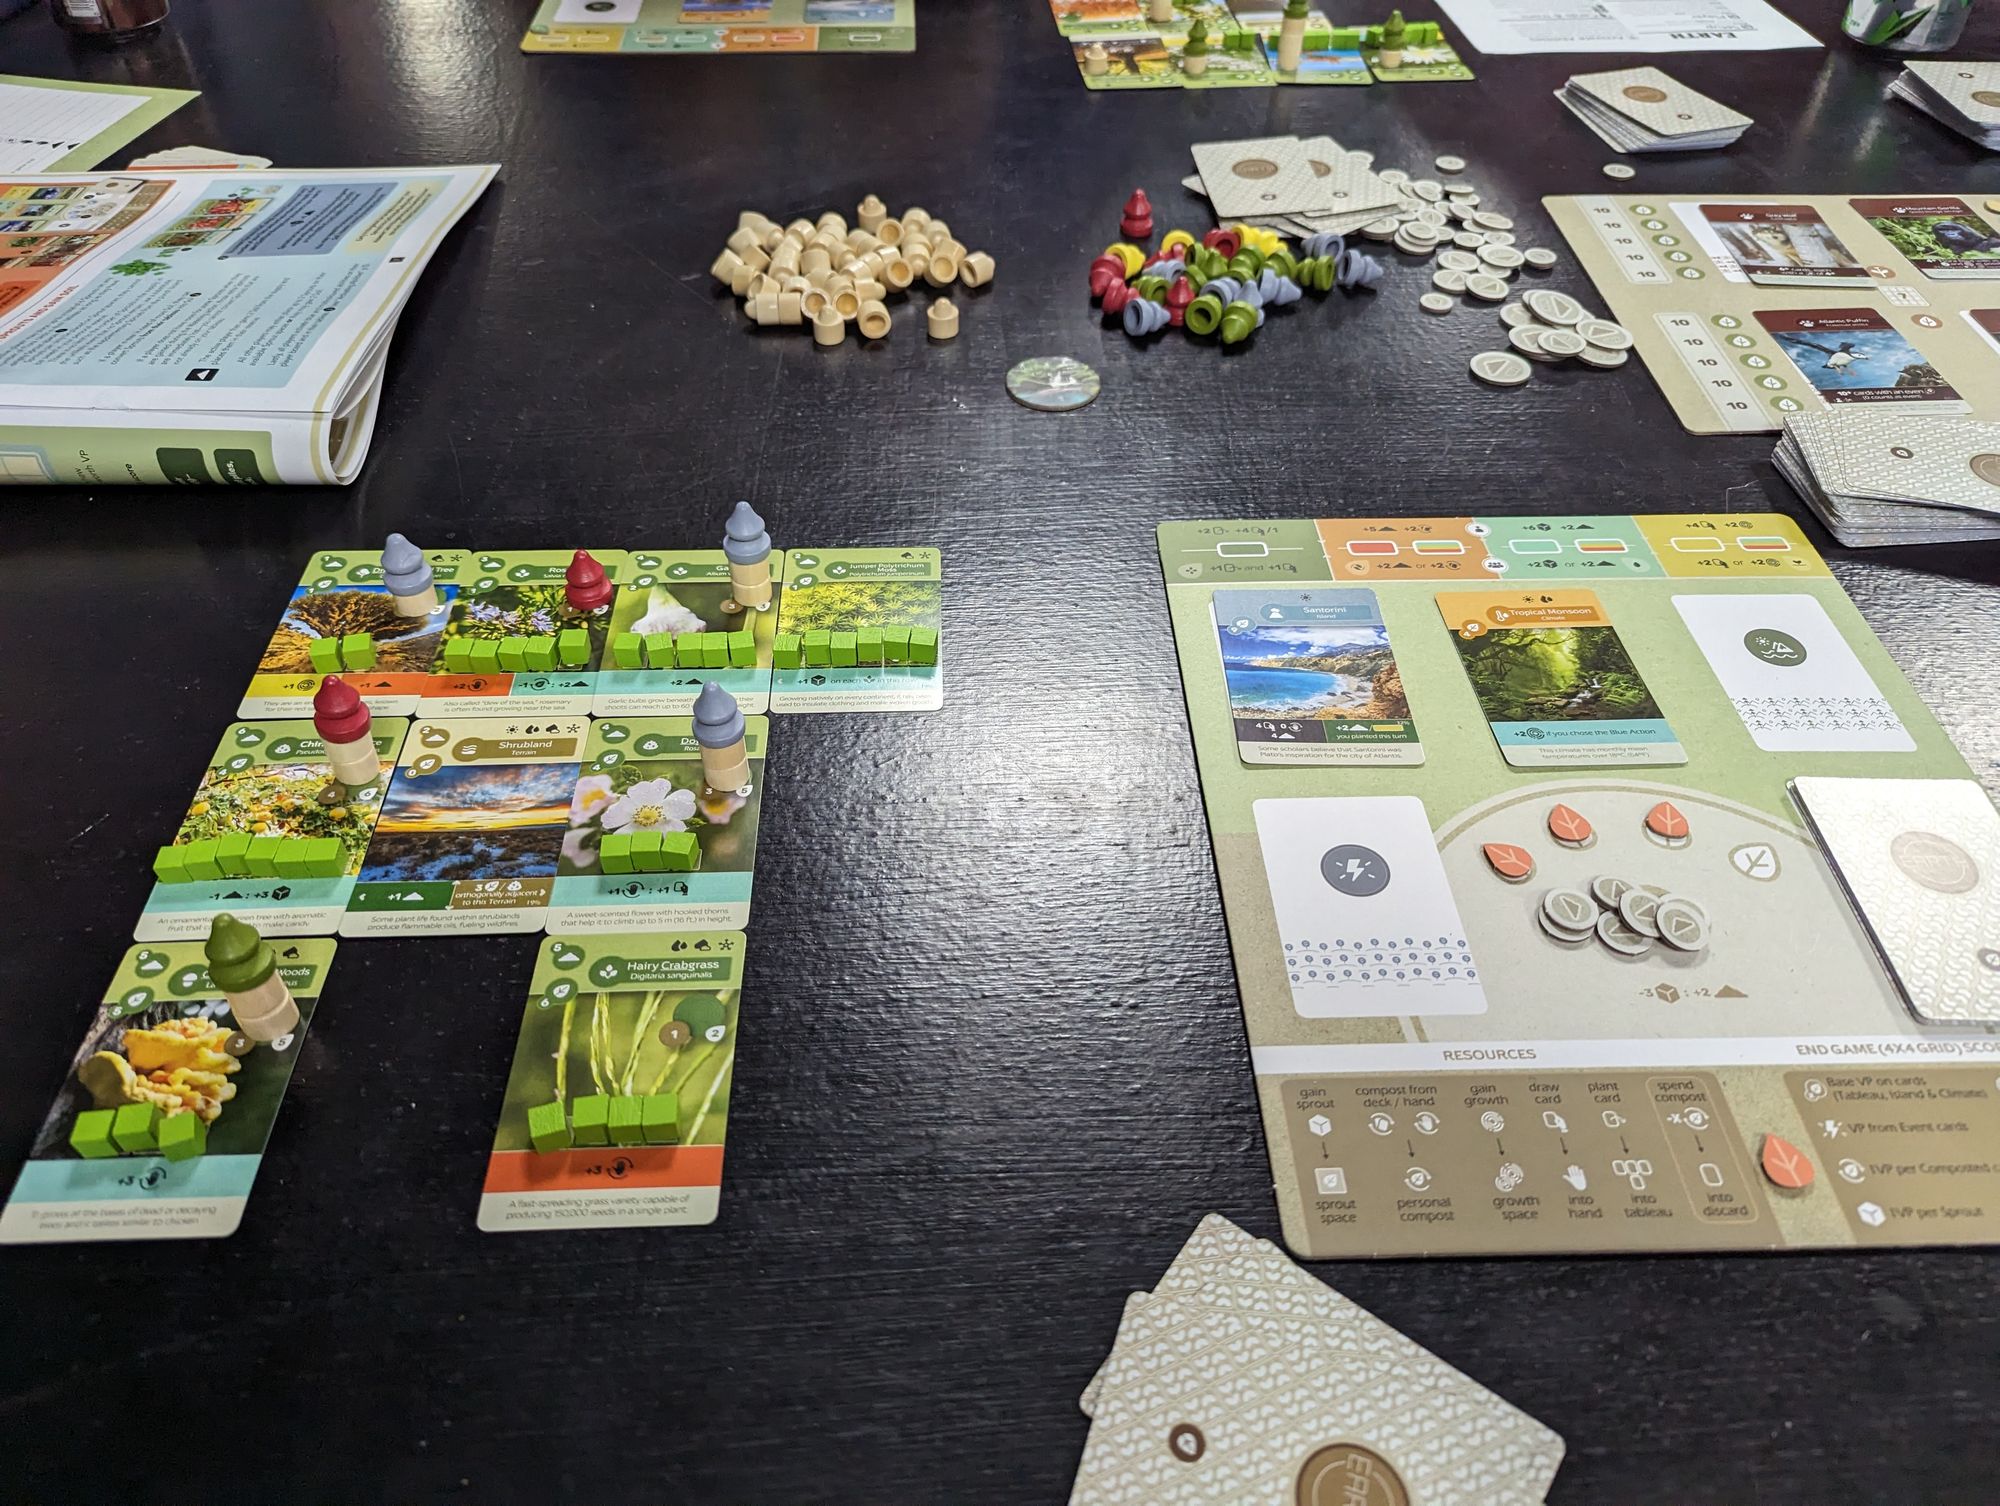 Exploring New Frontiers: My Journey with Earth at the Board Game Meetup